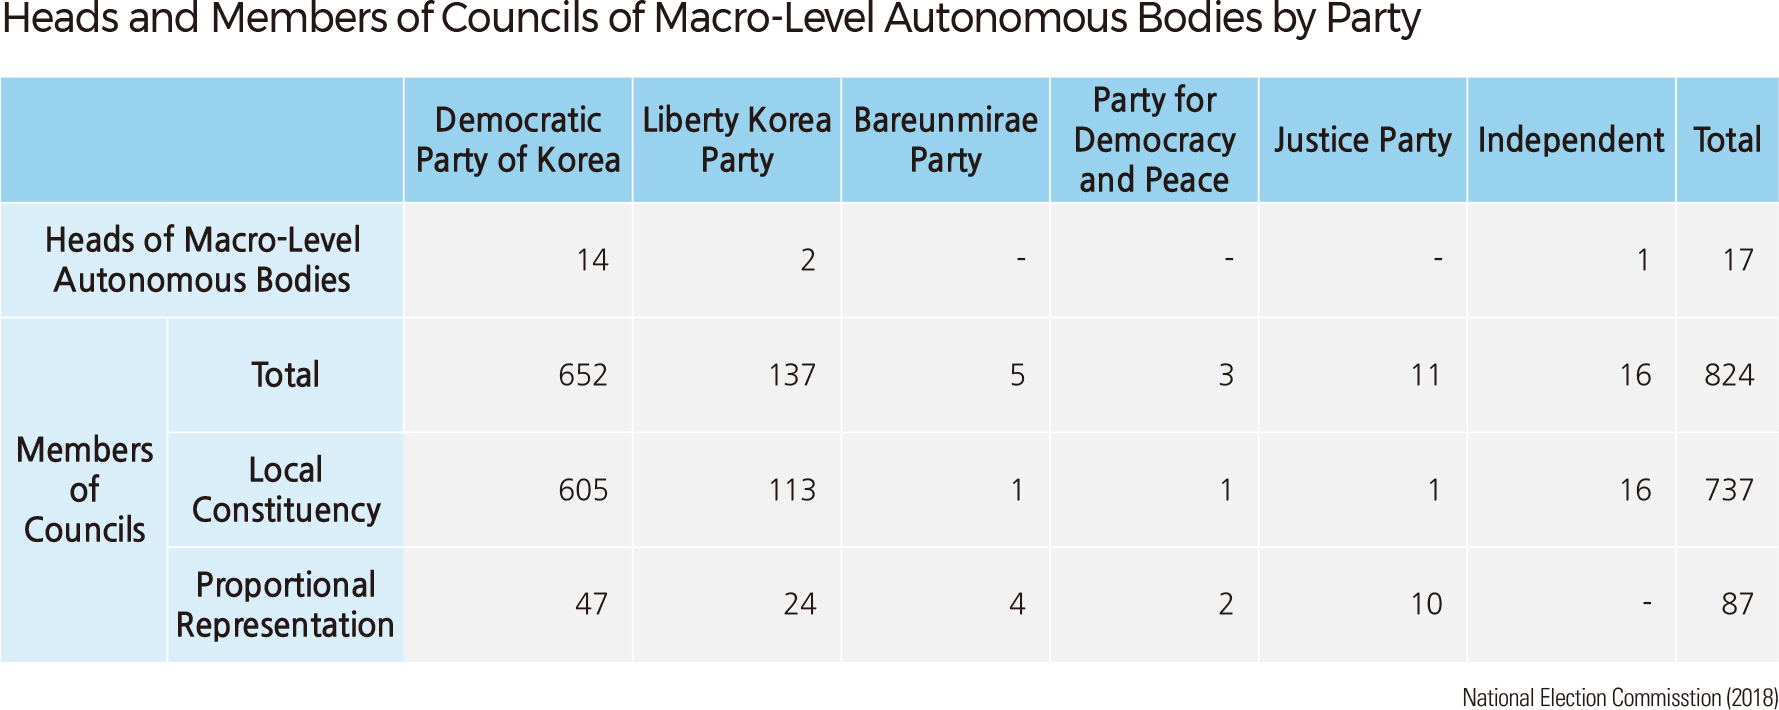 Heads and Members of Councils of Macro-Level Autonomous Bodies by Party